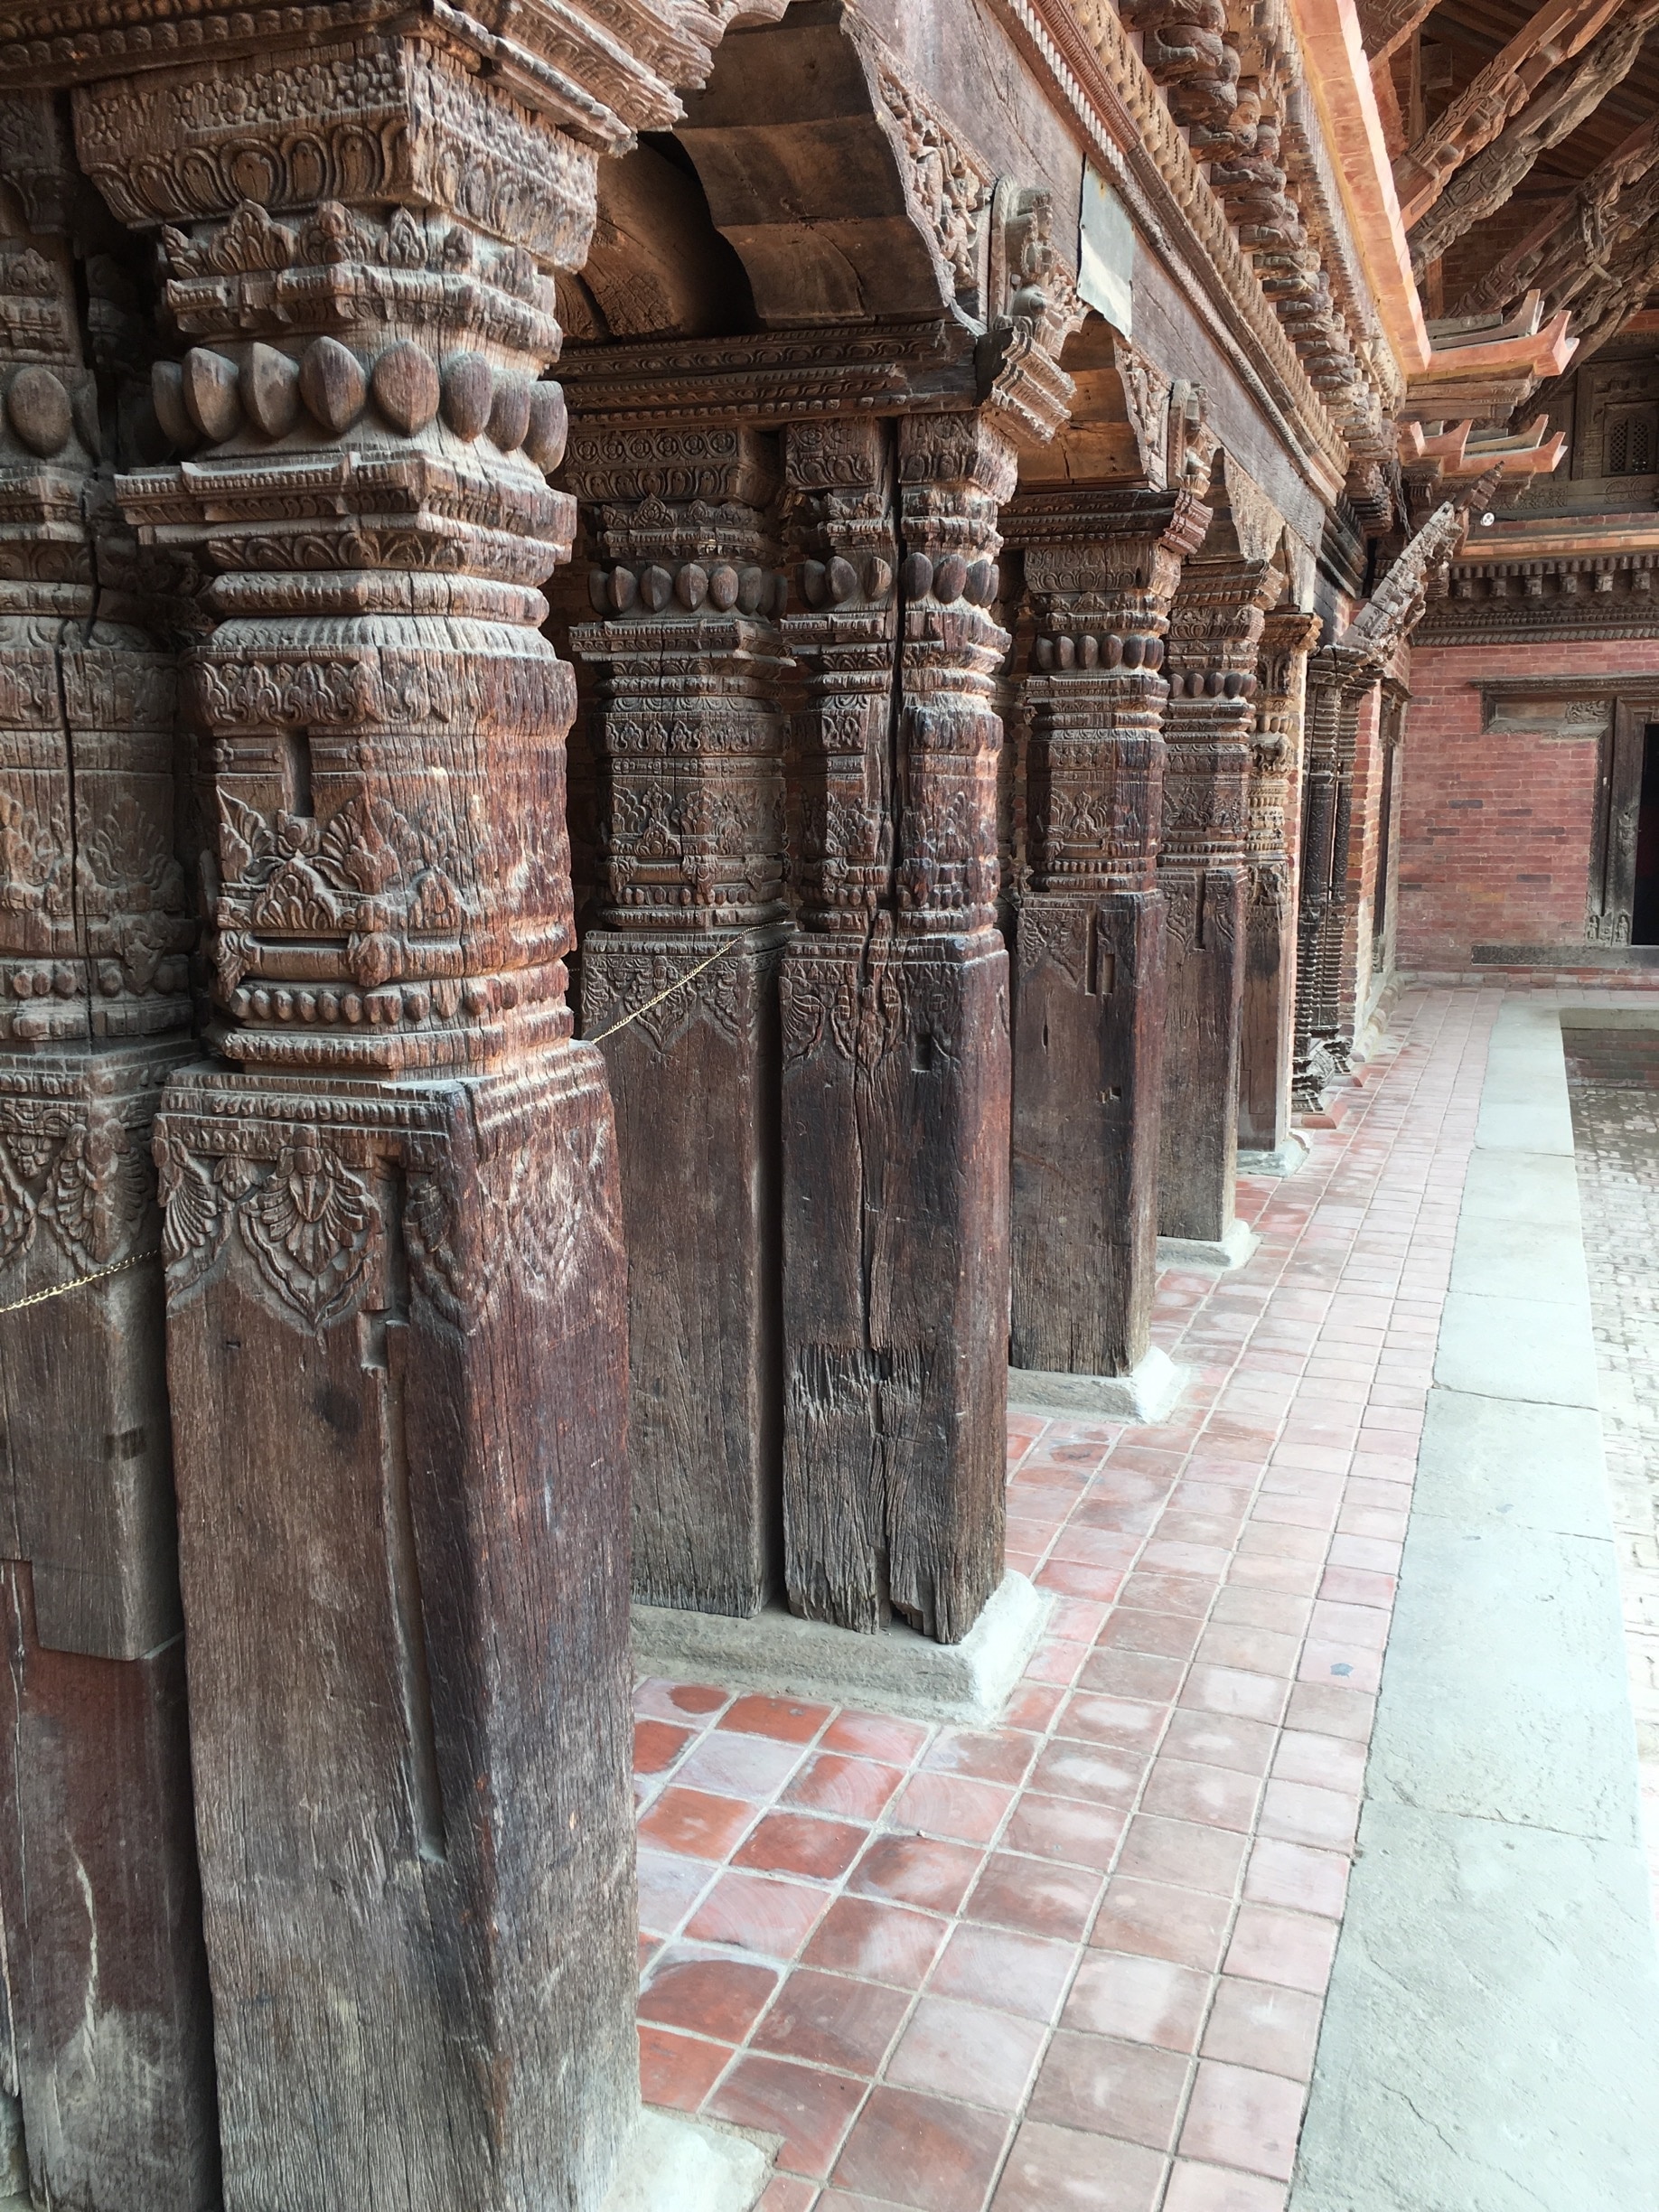 One of the worthwhile places to visit in Patan, Nepal. The museum is amazing!